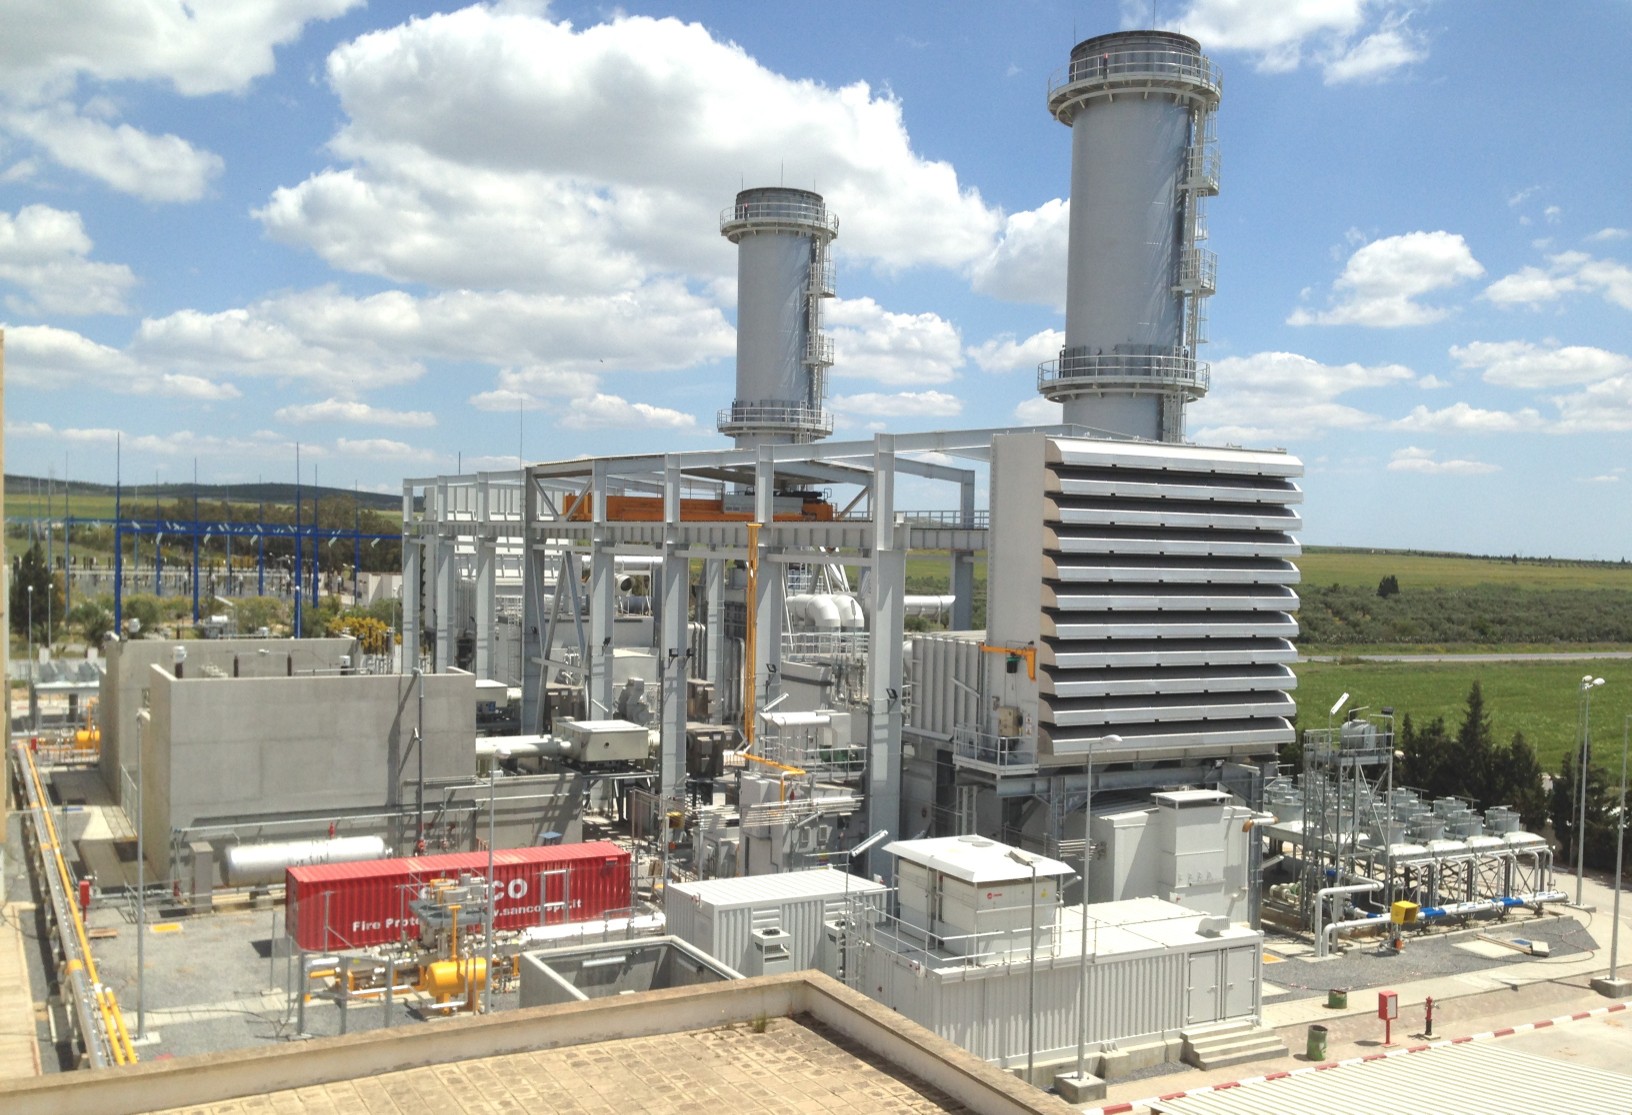 Used power plant